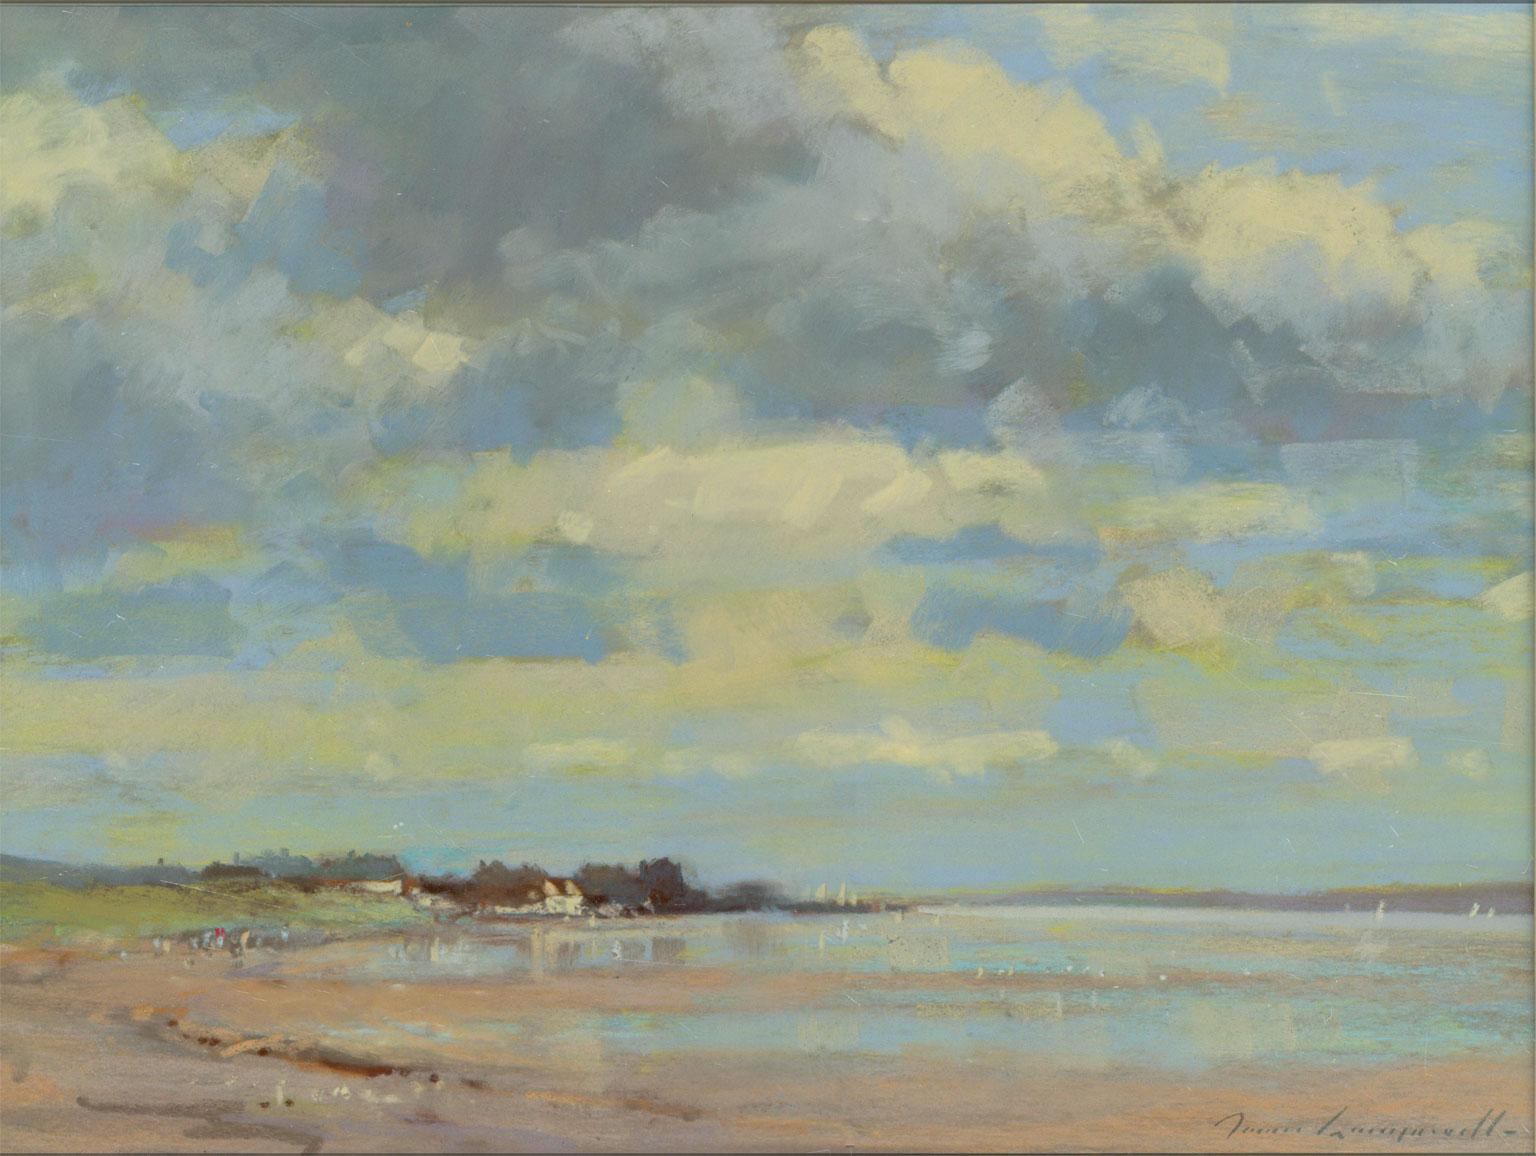 A fine pastel seascape by well listed artist James Longueville. The artist has captured the Dee Estuary which originates near Shotton, however the river soon swells to be several miles wide and forms the boundary between the Wirral Peninsula in